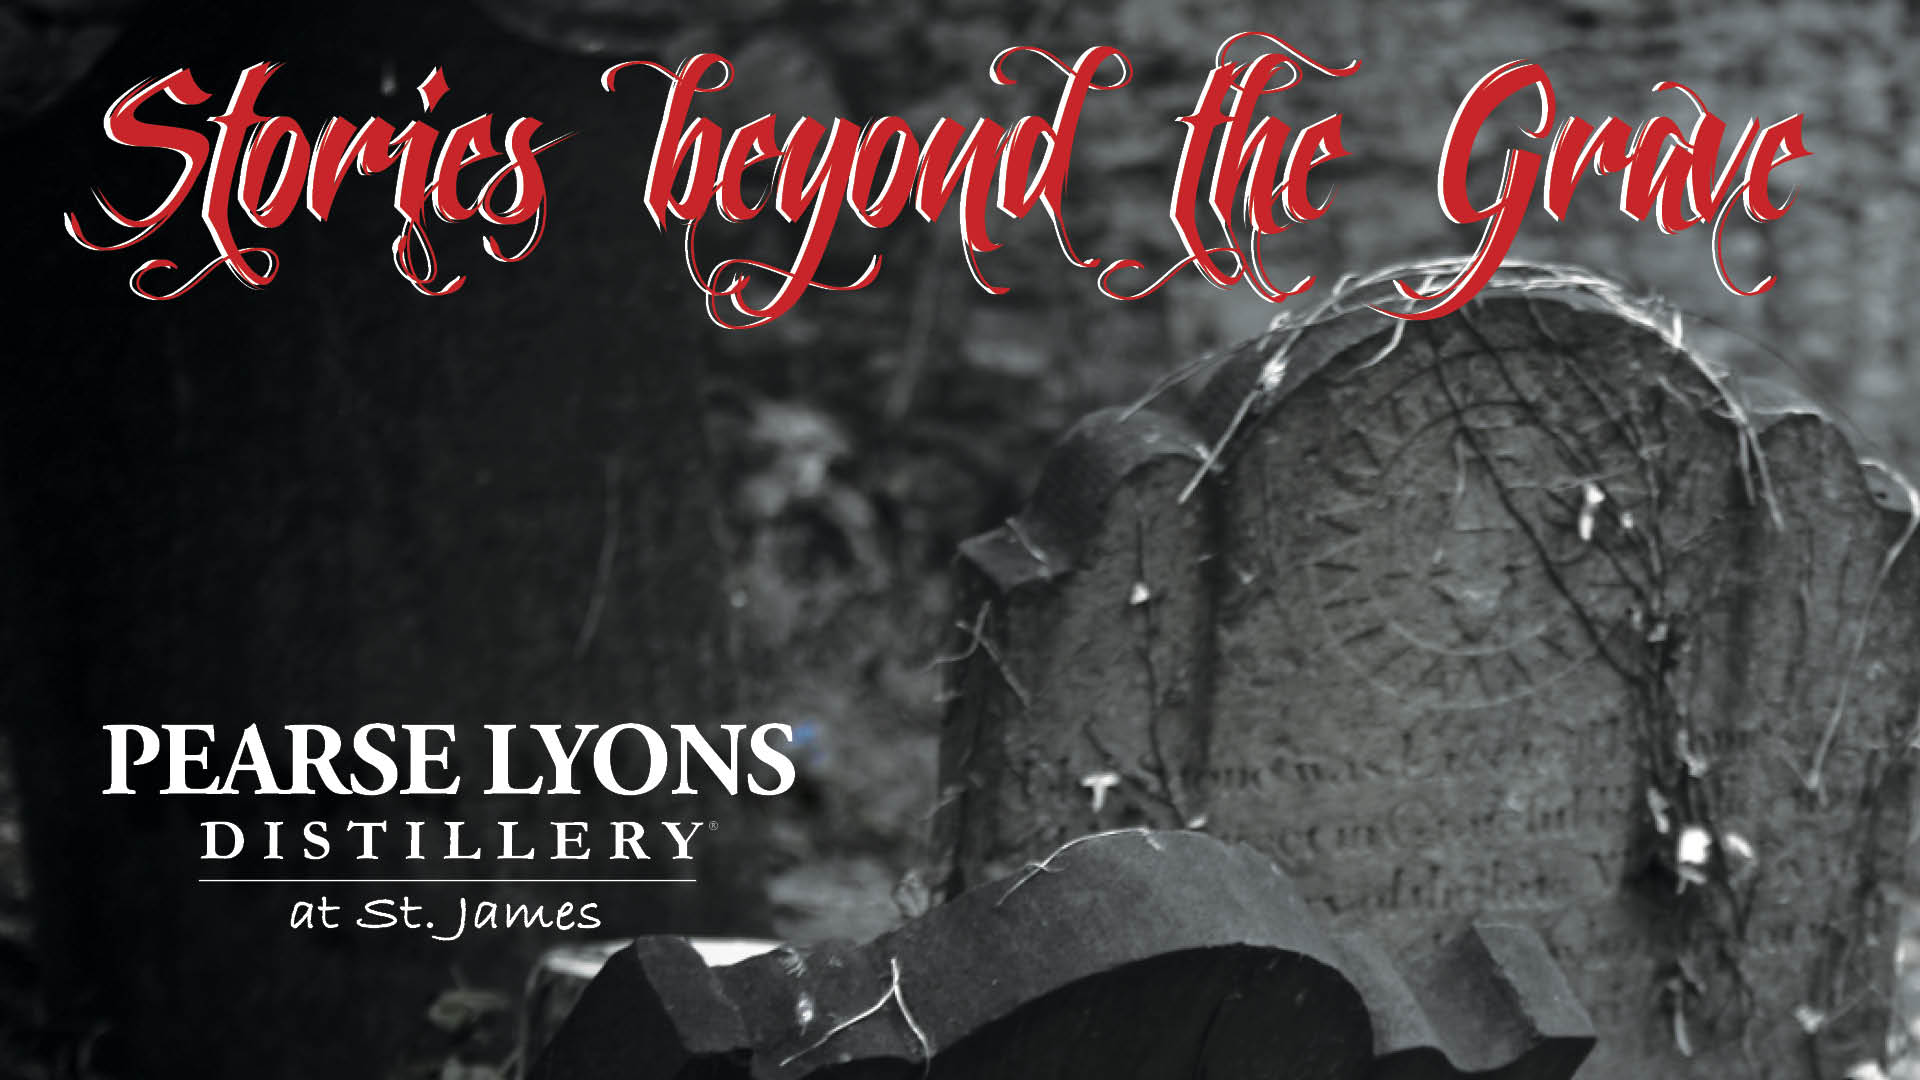 ‘Stories Beyond The Grave’ at Pearse Lyons Distillery as part of the Bram Stoker Festival